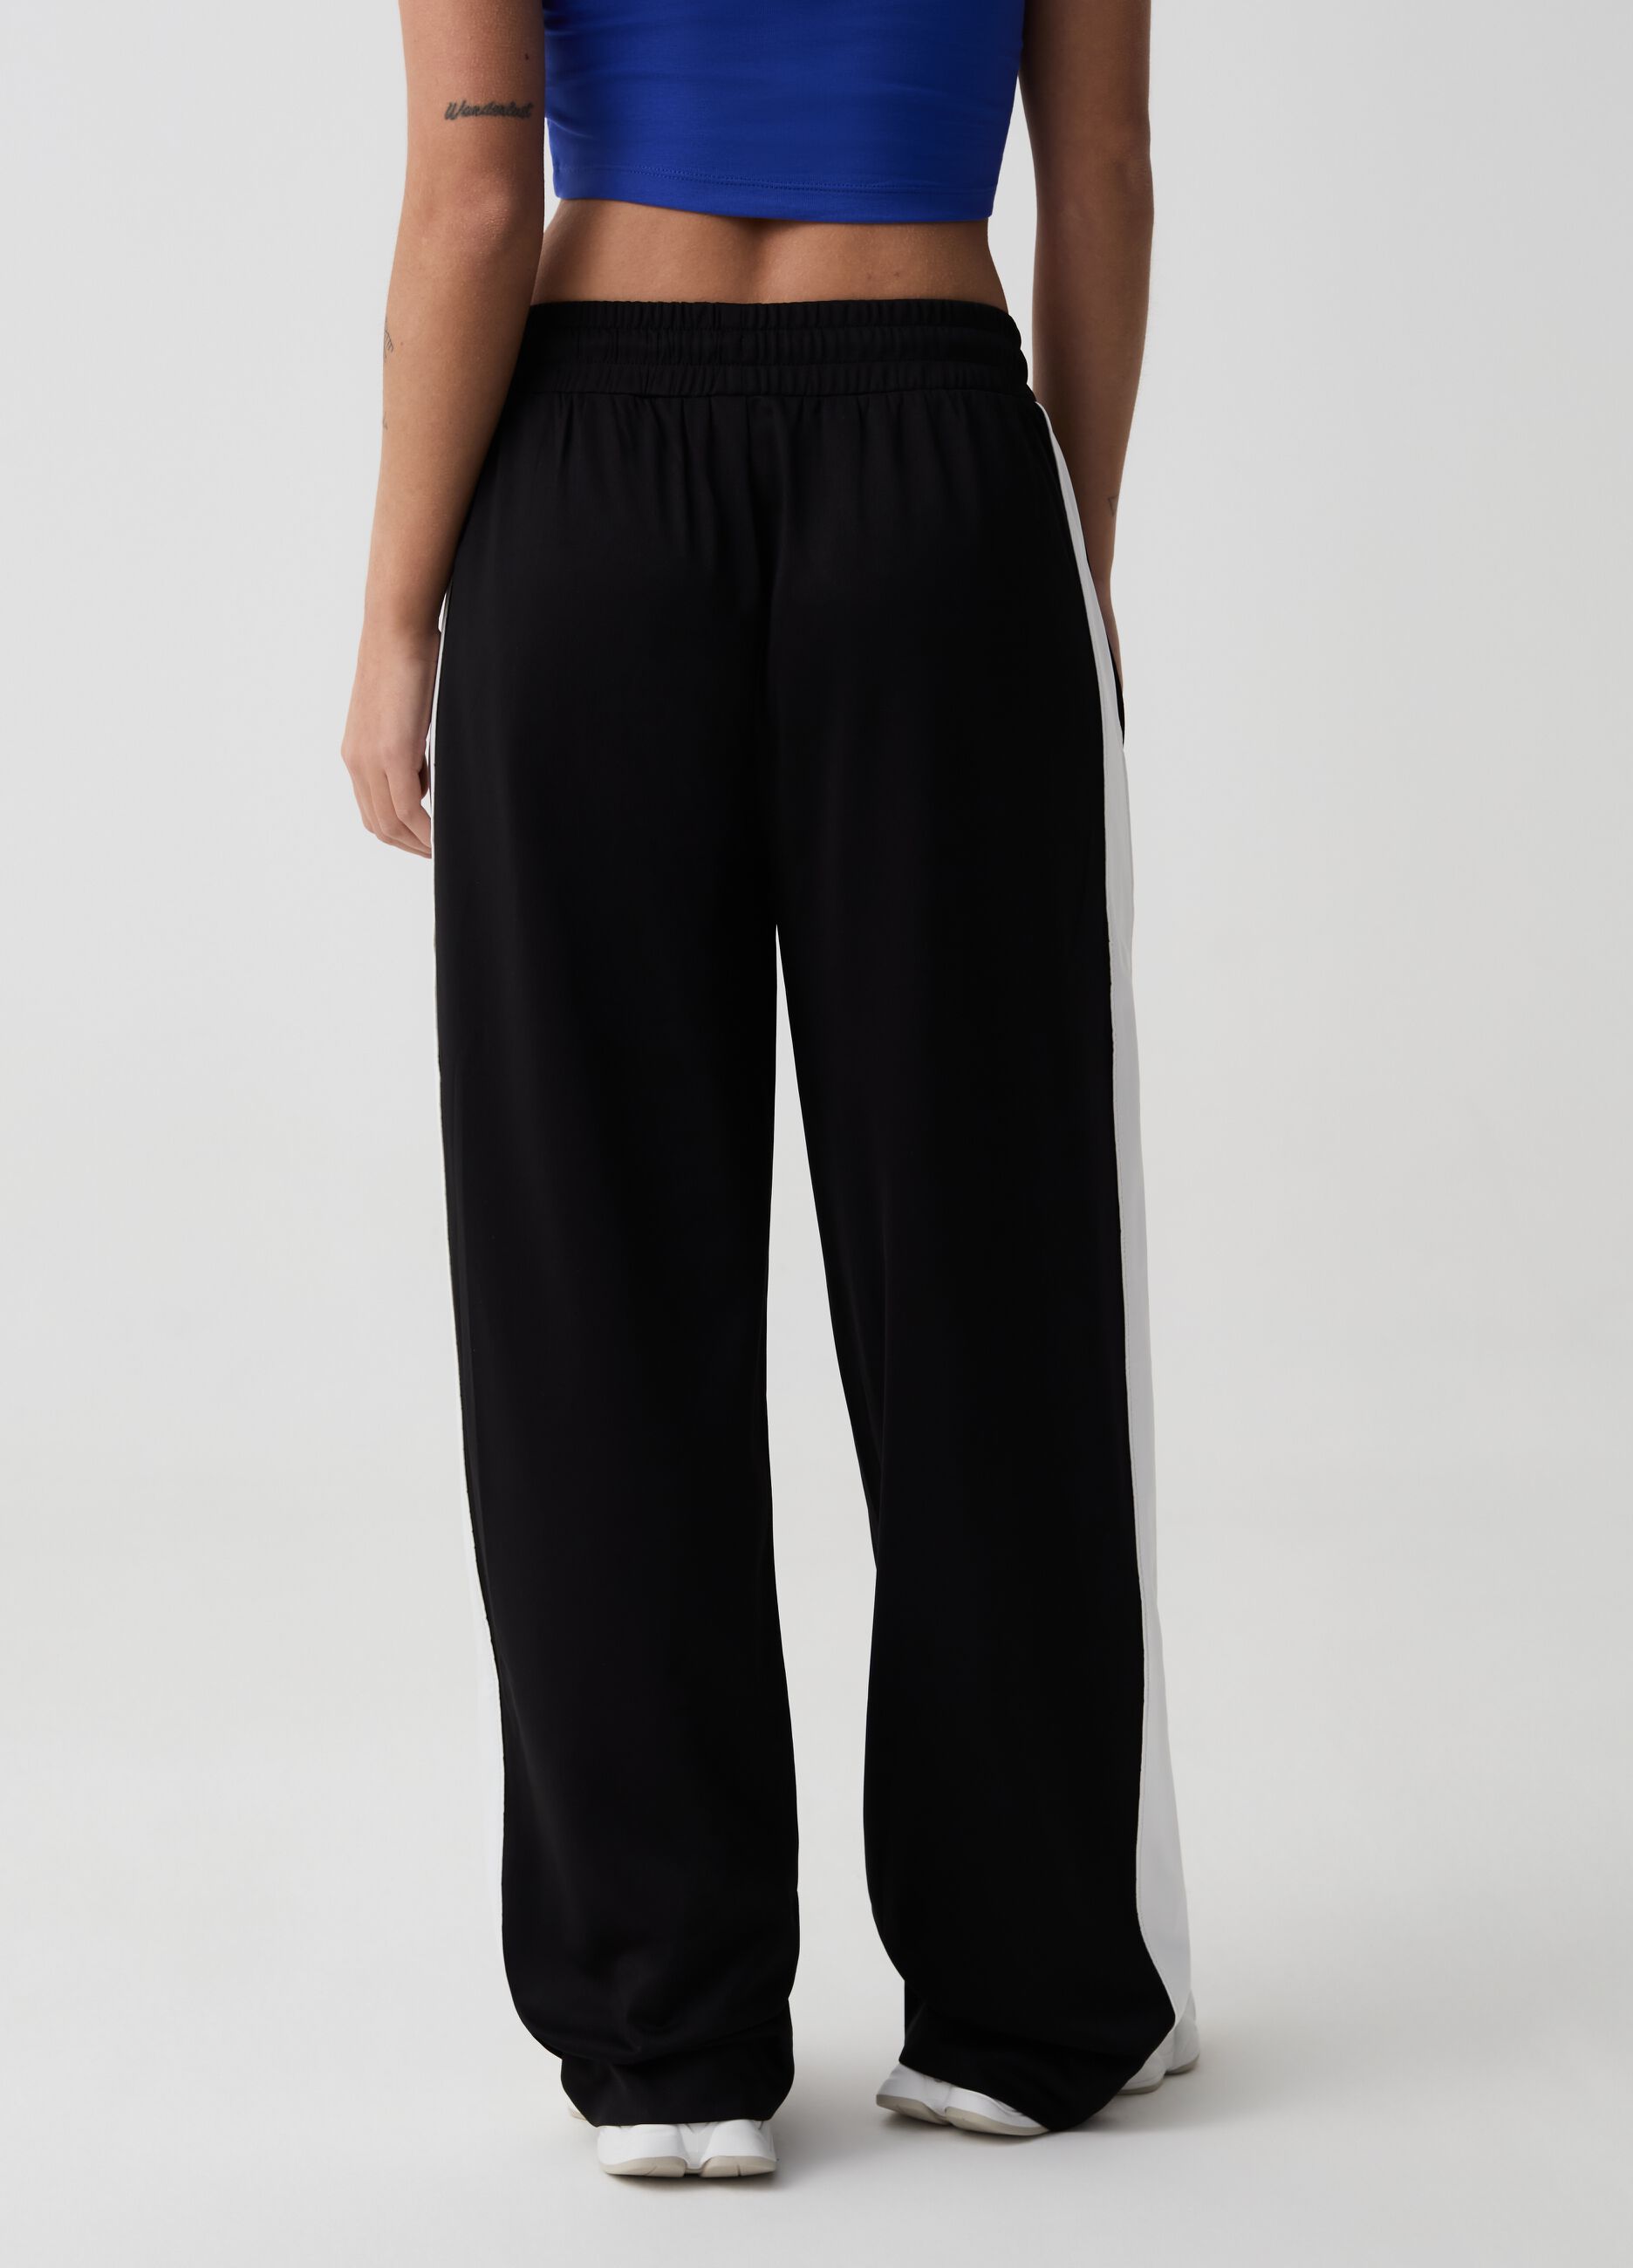 B.ANGEL FOR THE SEA BEYOND wide-leg joggers with contrasting bands